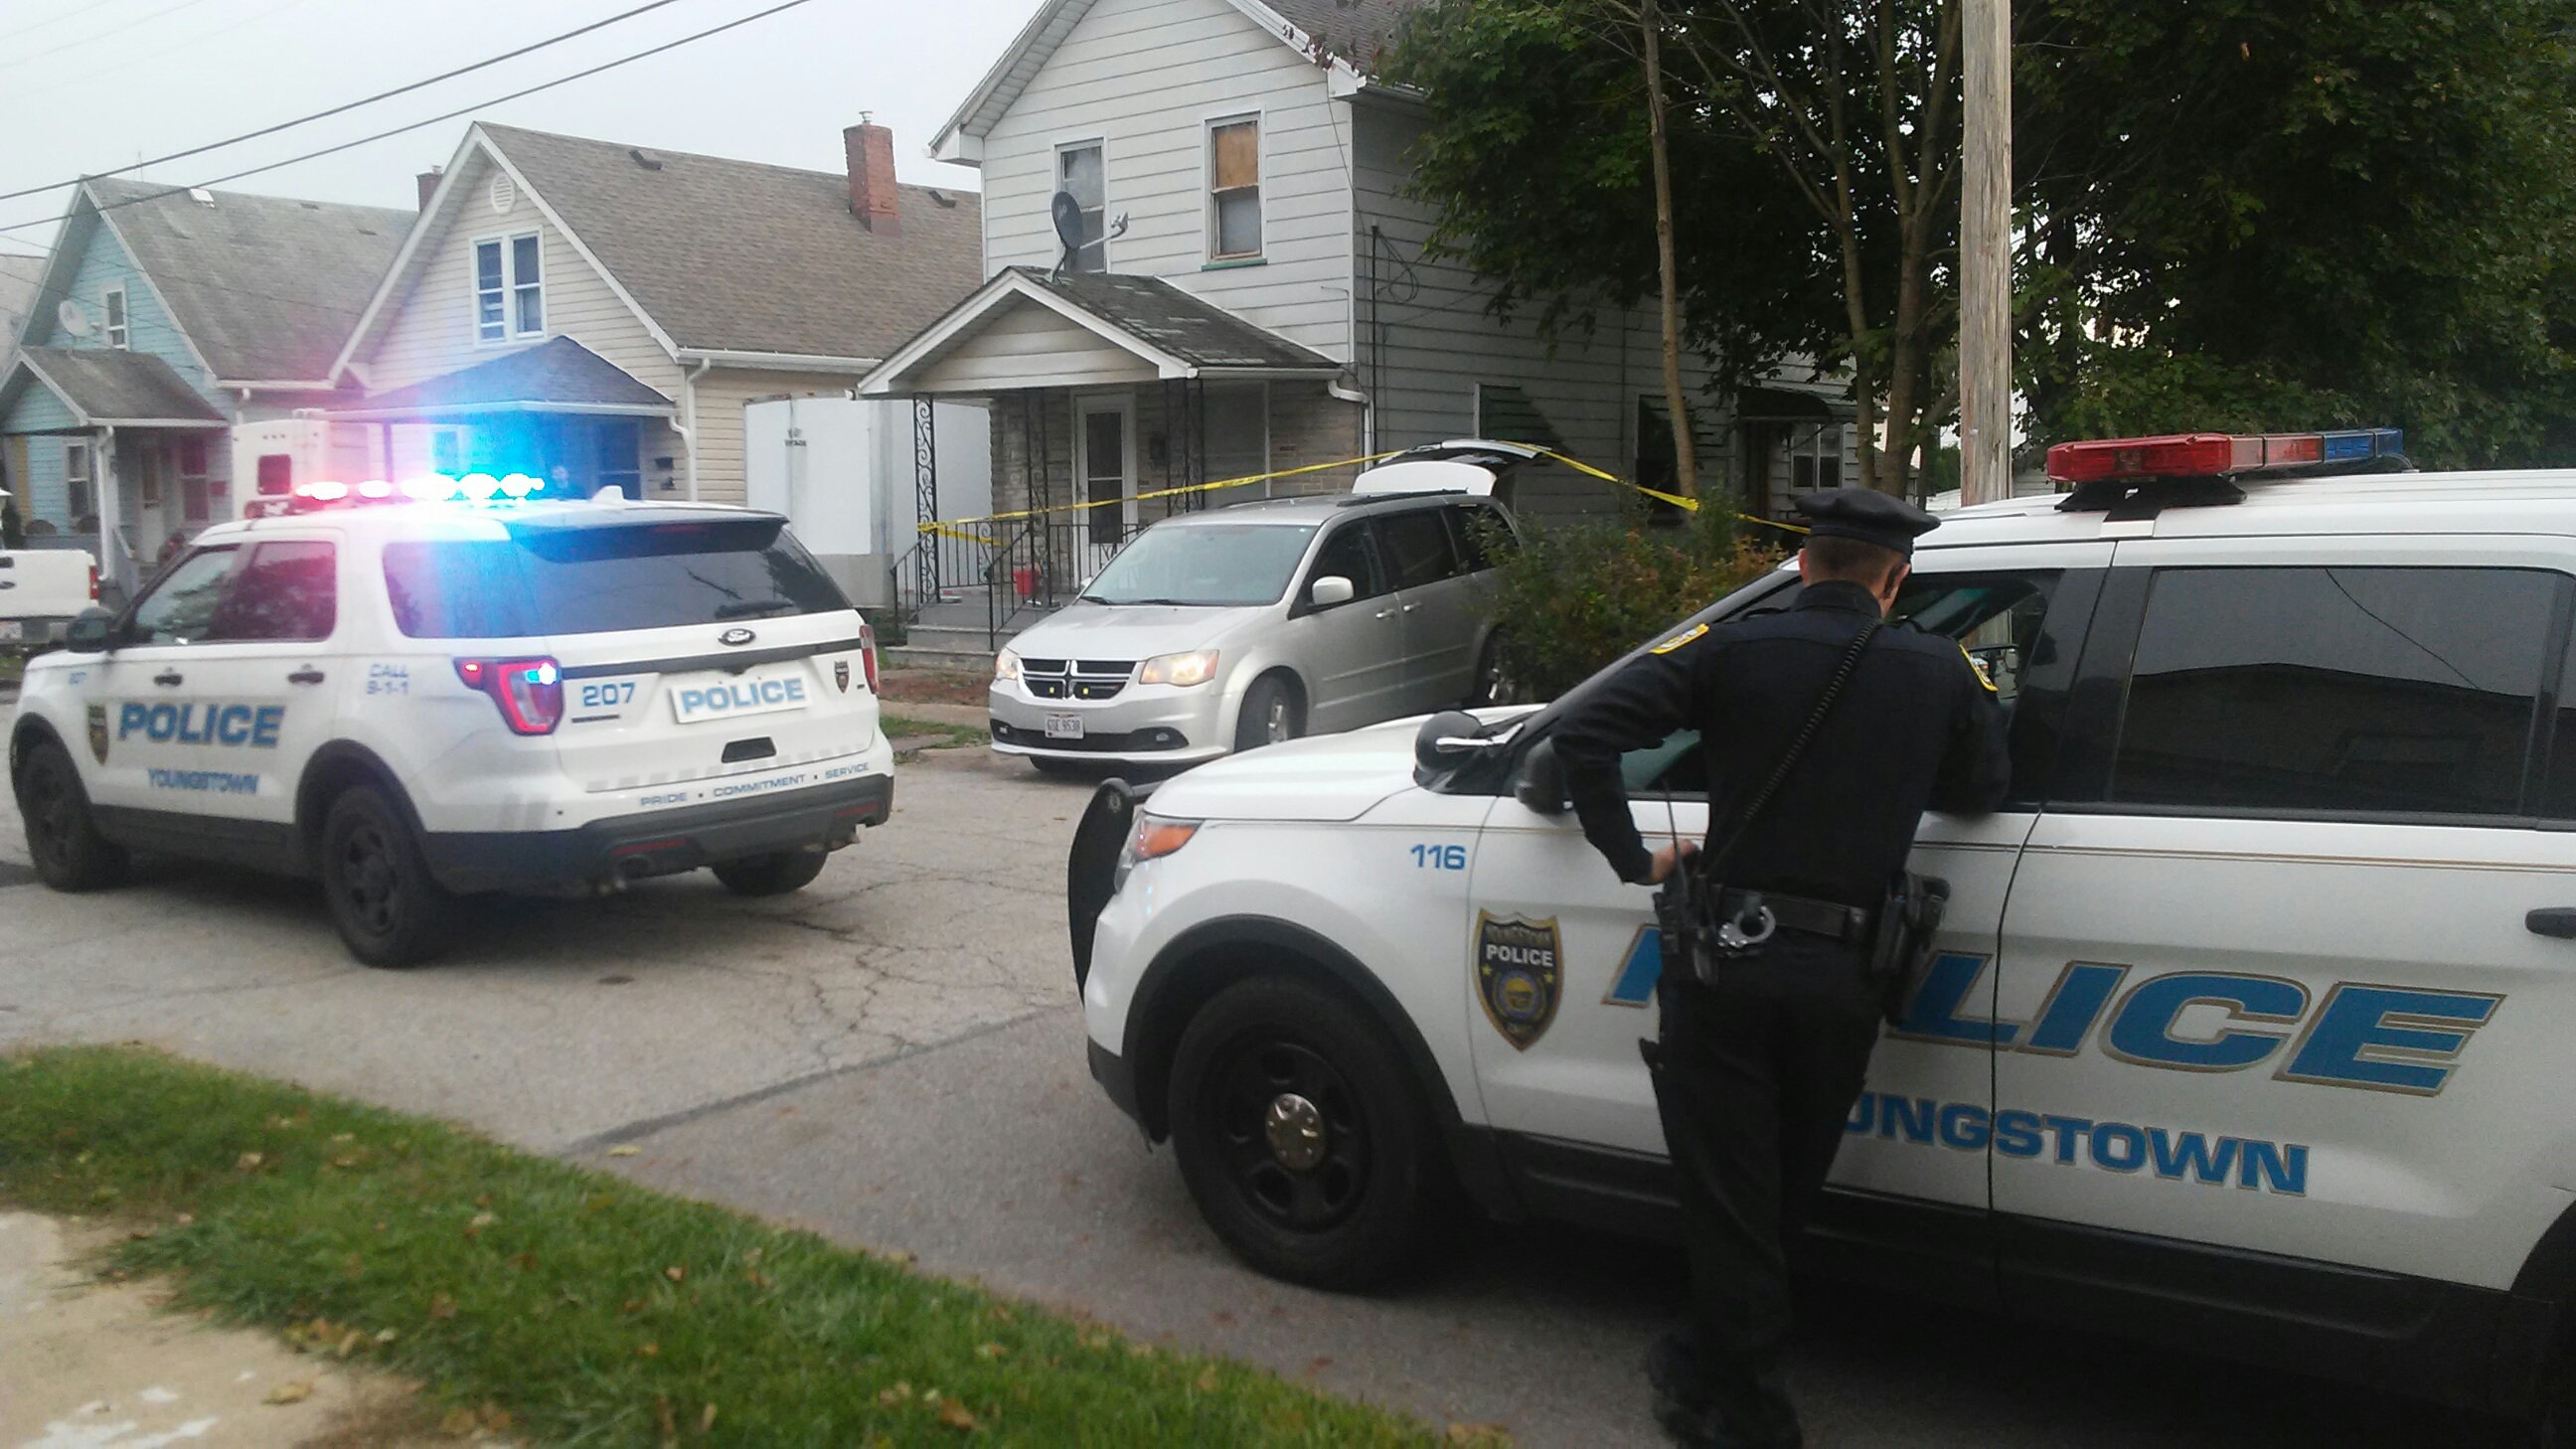 Police said a man who was found shot to death in an Imperial Street home about 3:30 p.m. had been shot several times.